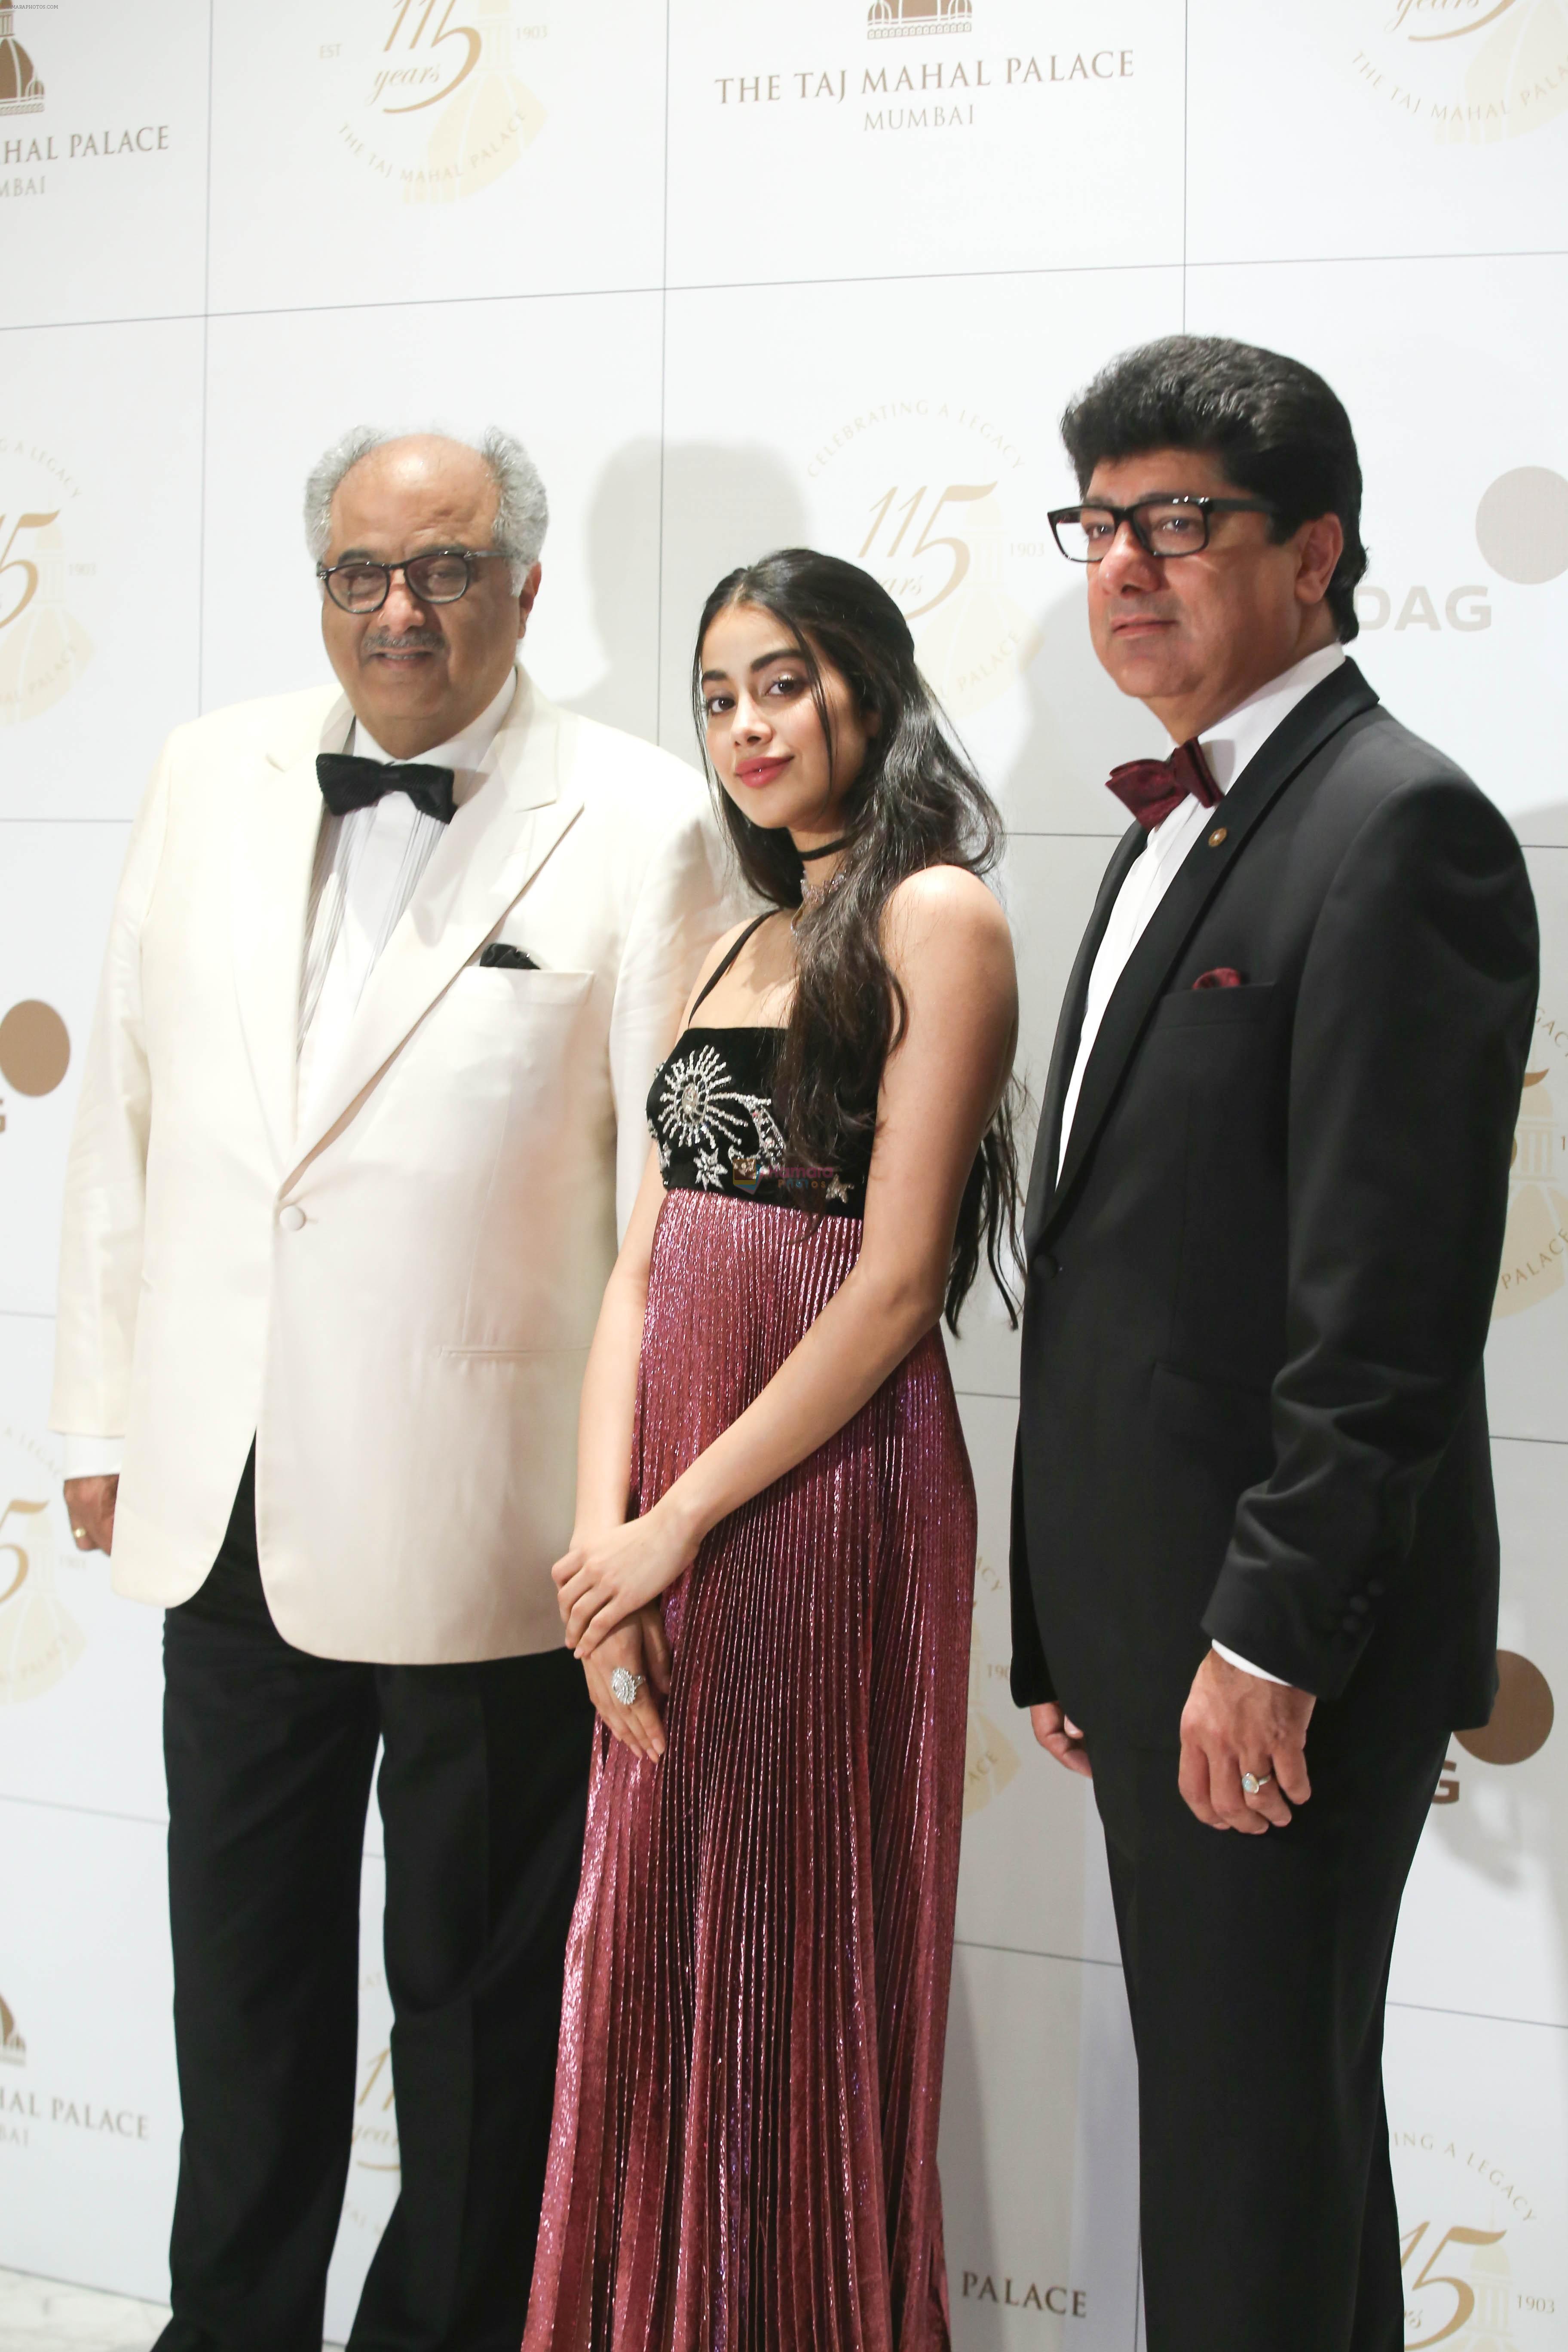 Janhvi Kapoor, Boney Kapoor attends the 115th anniversary celebration of Taj Mahal Palace which was celebrated with A Black Tie Charity Ball in mumbai on 15th Dec 2018